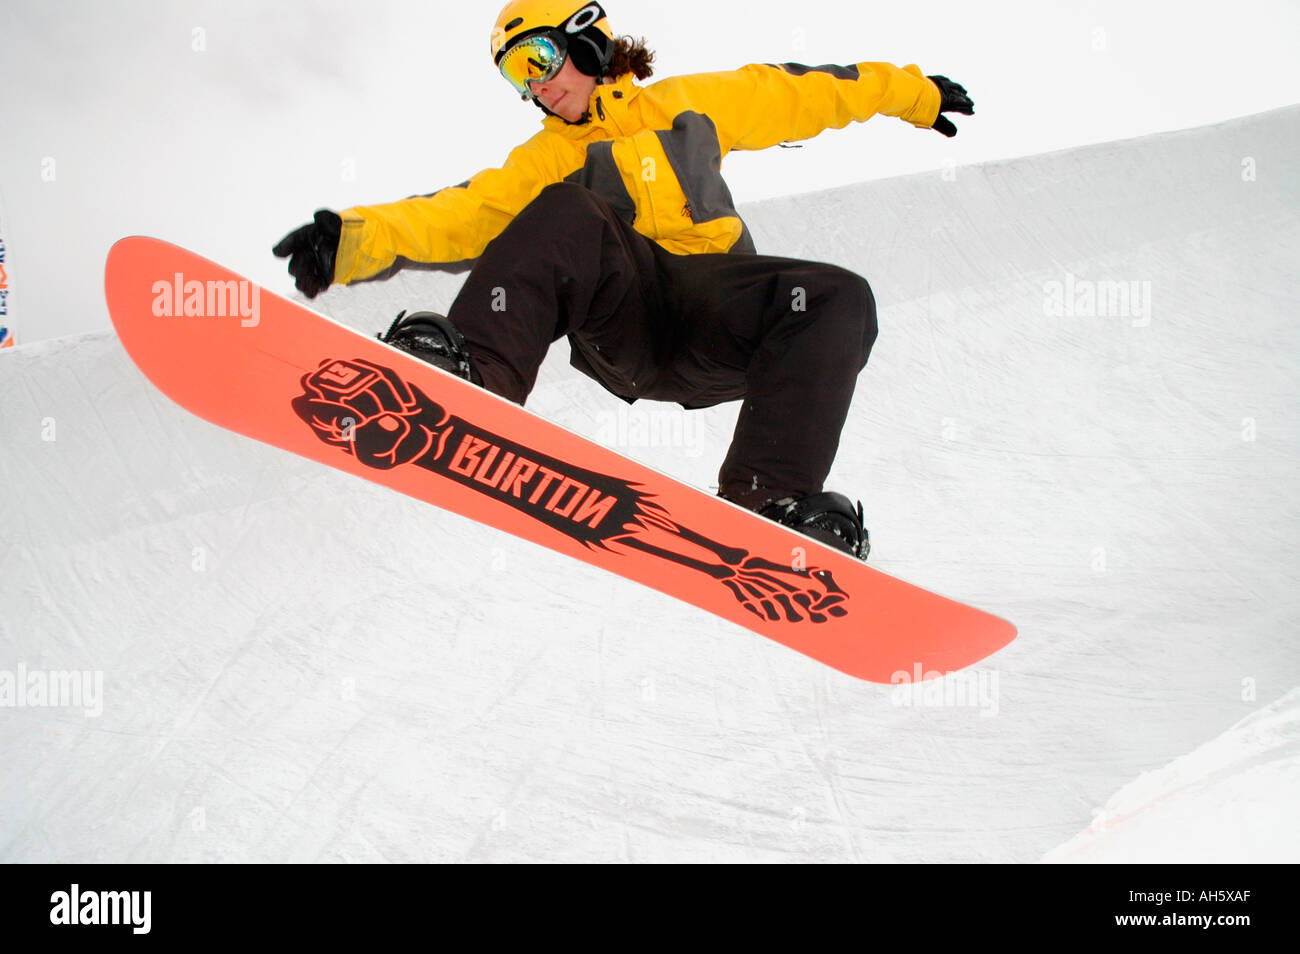 Snowboarder riding the half pipe on the glacier at Les Deux Alpes, France Stock Photo